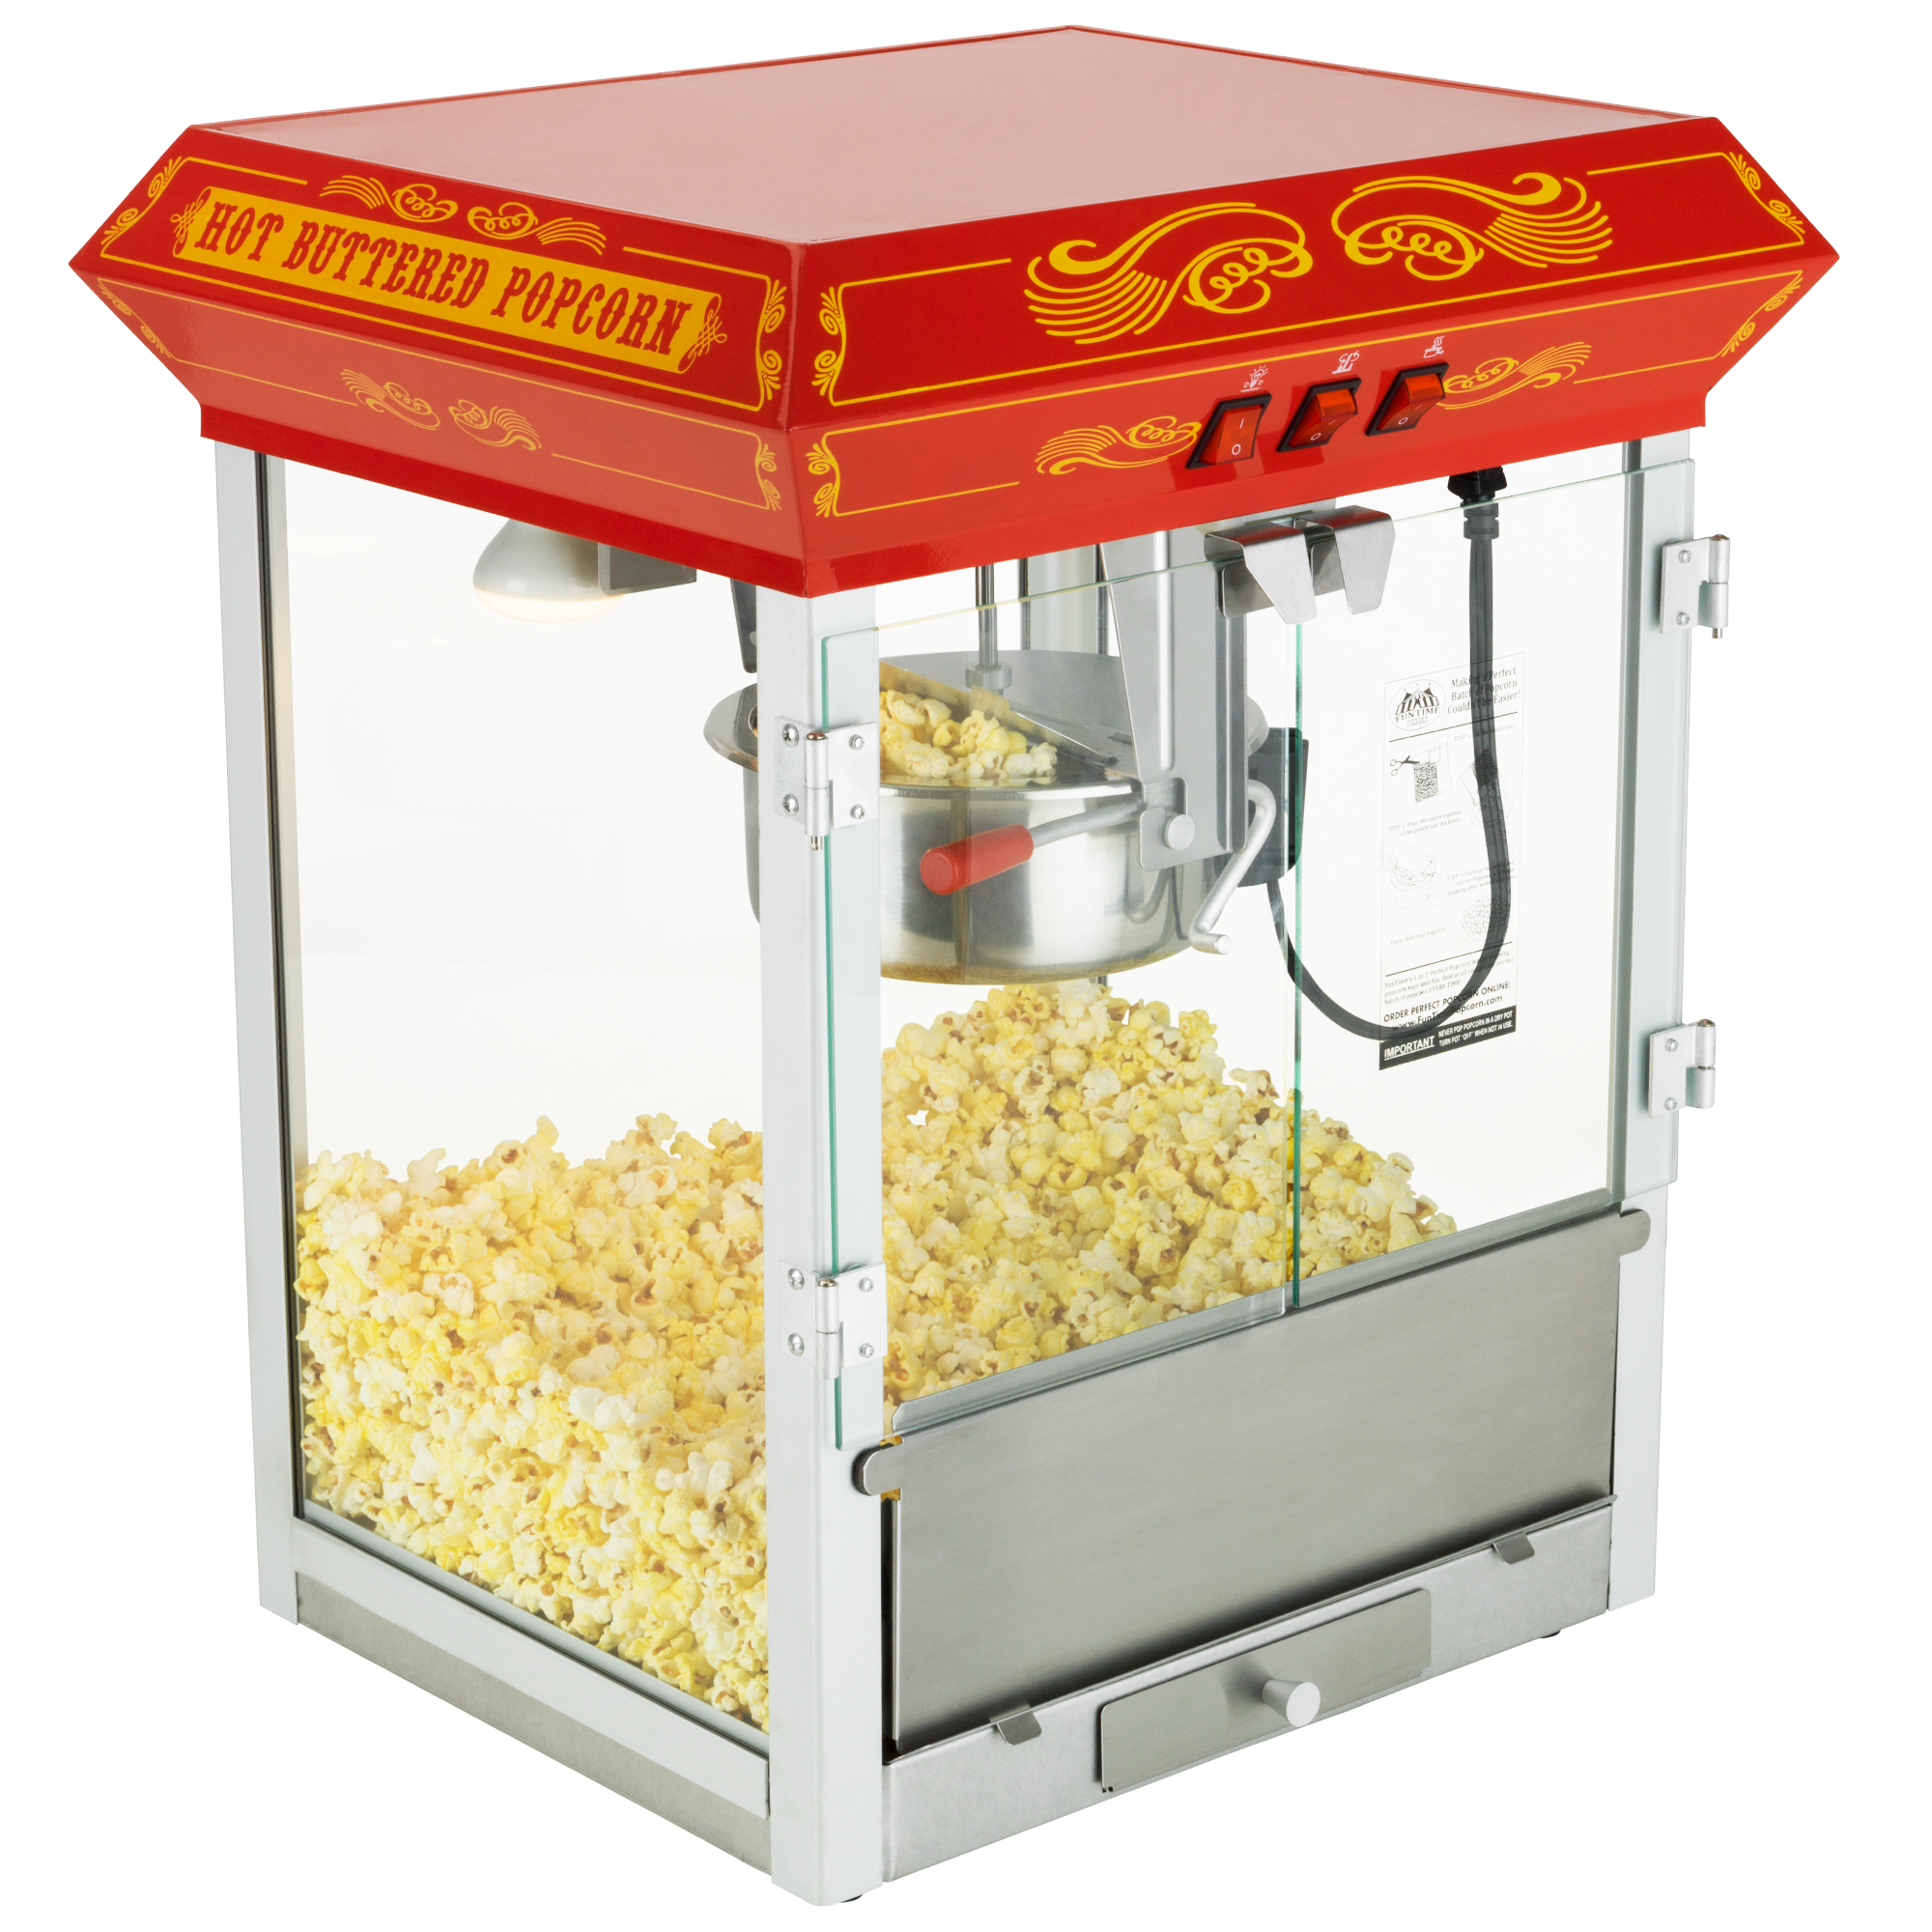 Air Popper Popcorn Maker – Vintage-Style Countertop Popper Machine with  6-Cup Capacity by Great Northern Popcorn Company (Red) (83-DT6082)